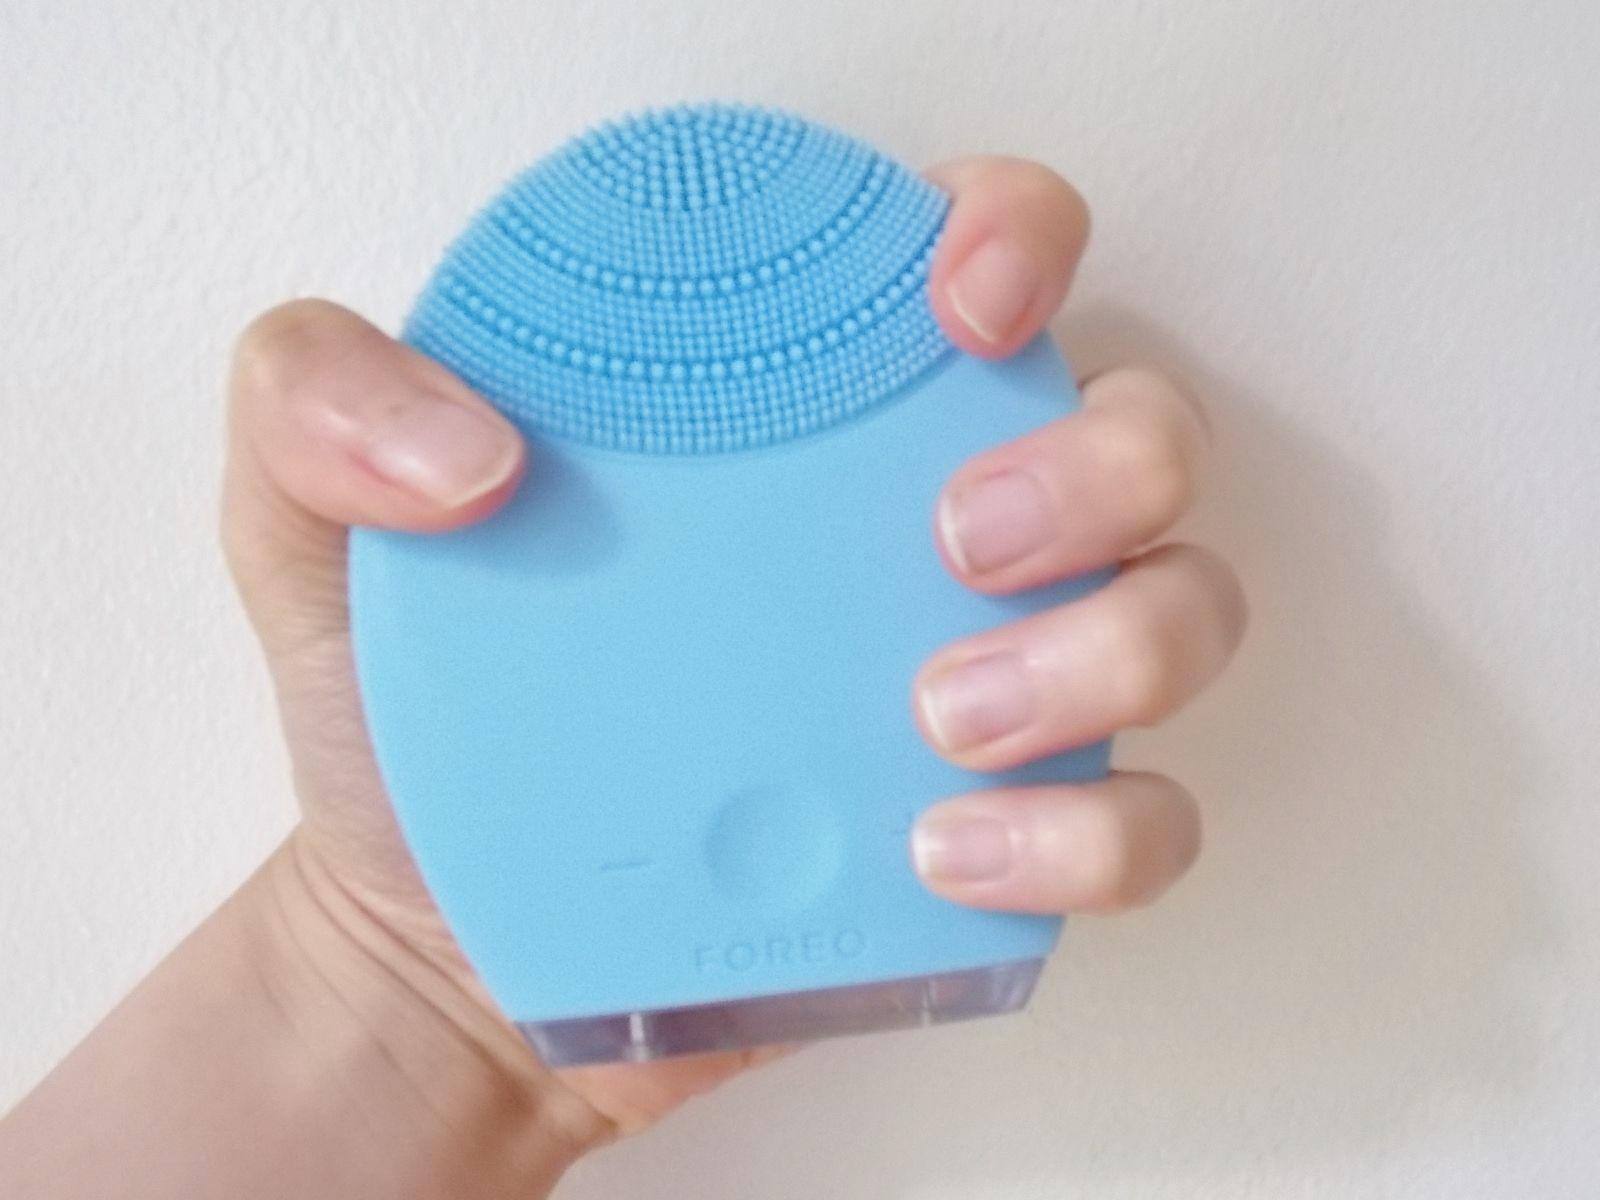 Clairsonic facial brush by phillips